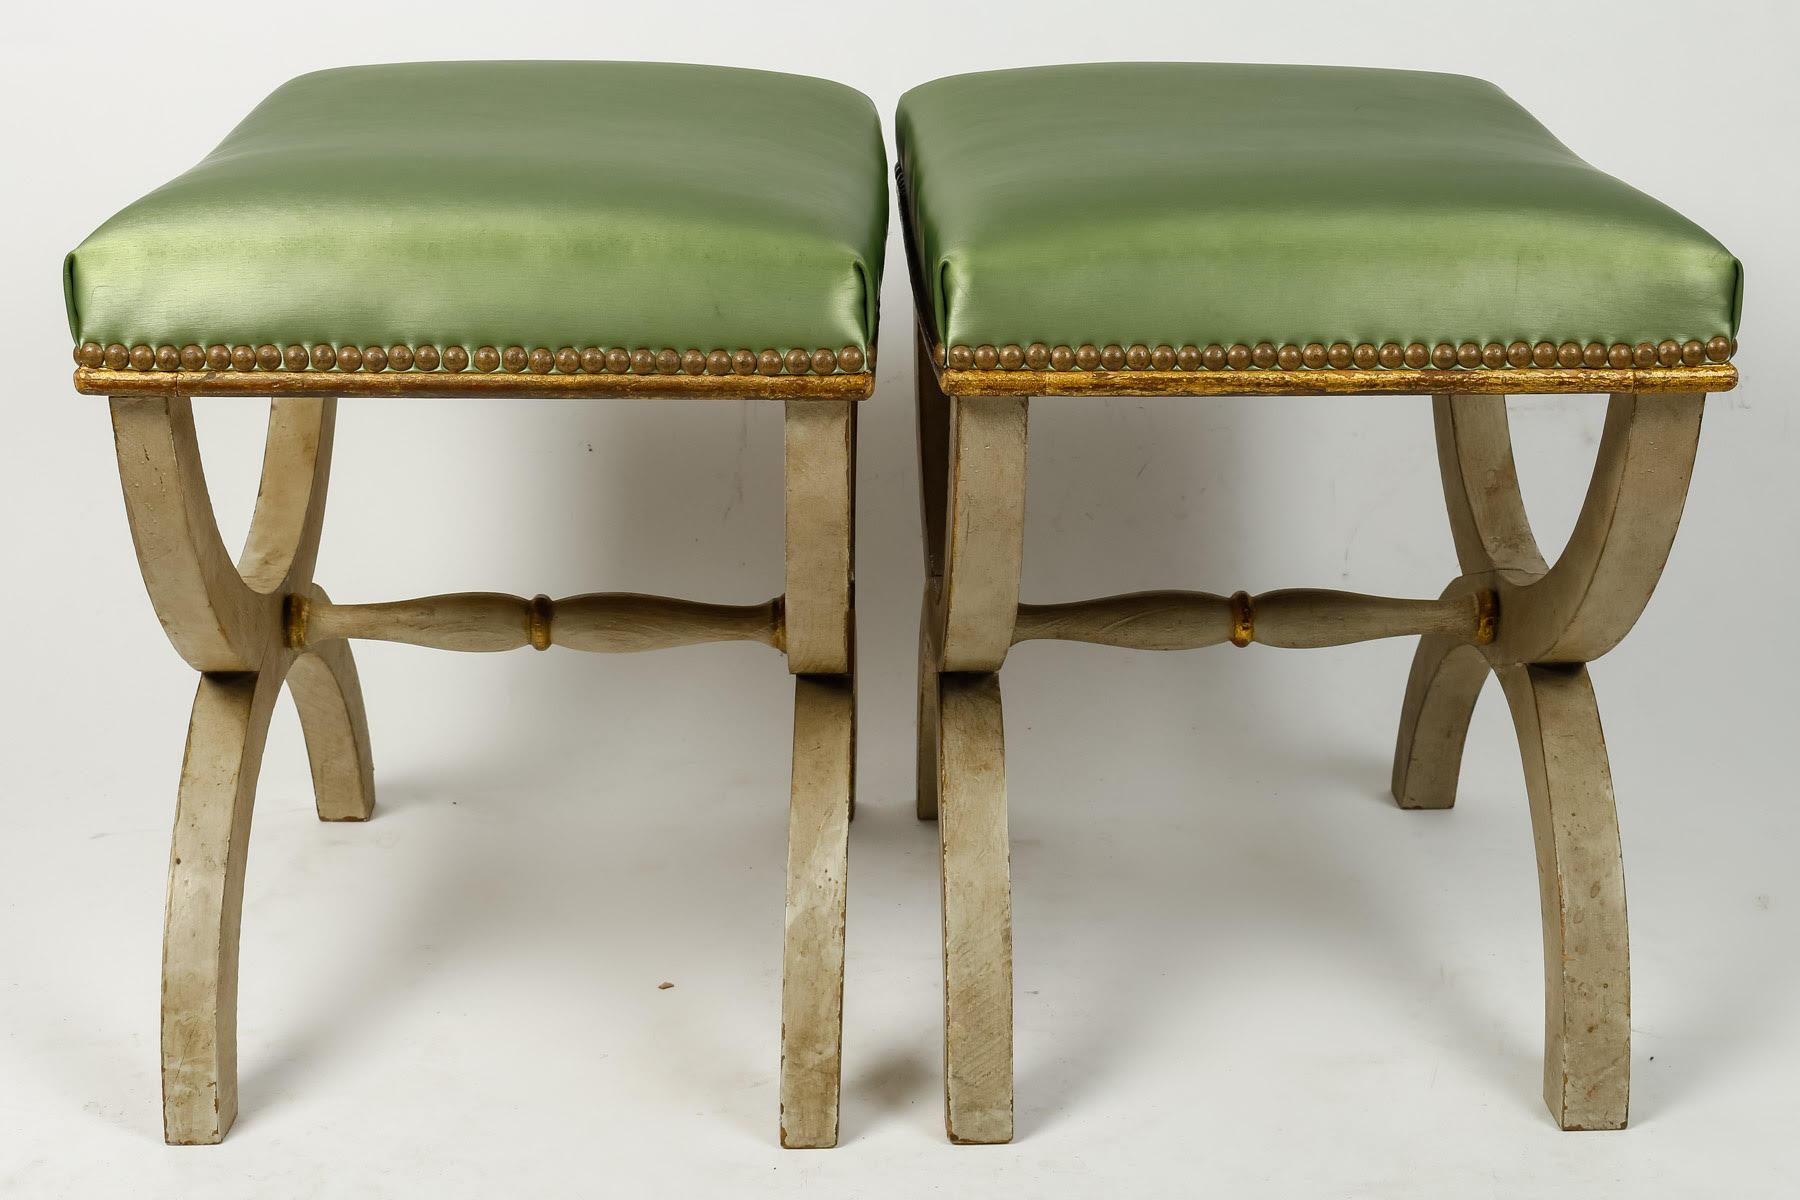 French Pair of Lacquered Wood X-shaped Stools, Early 20th Century.